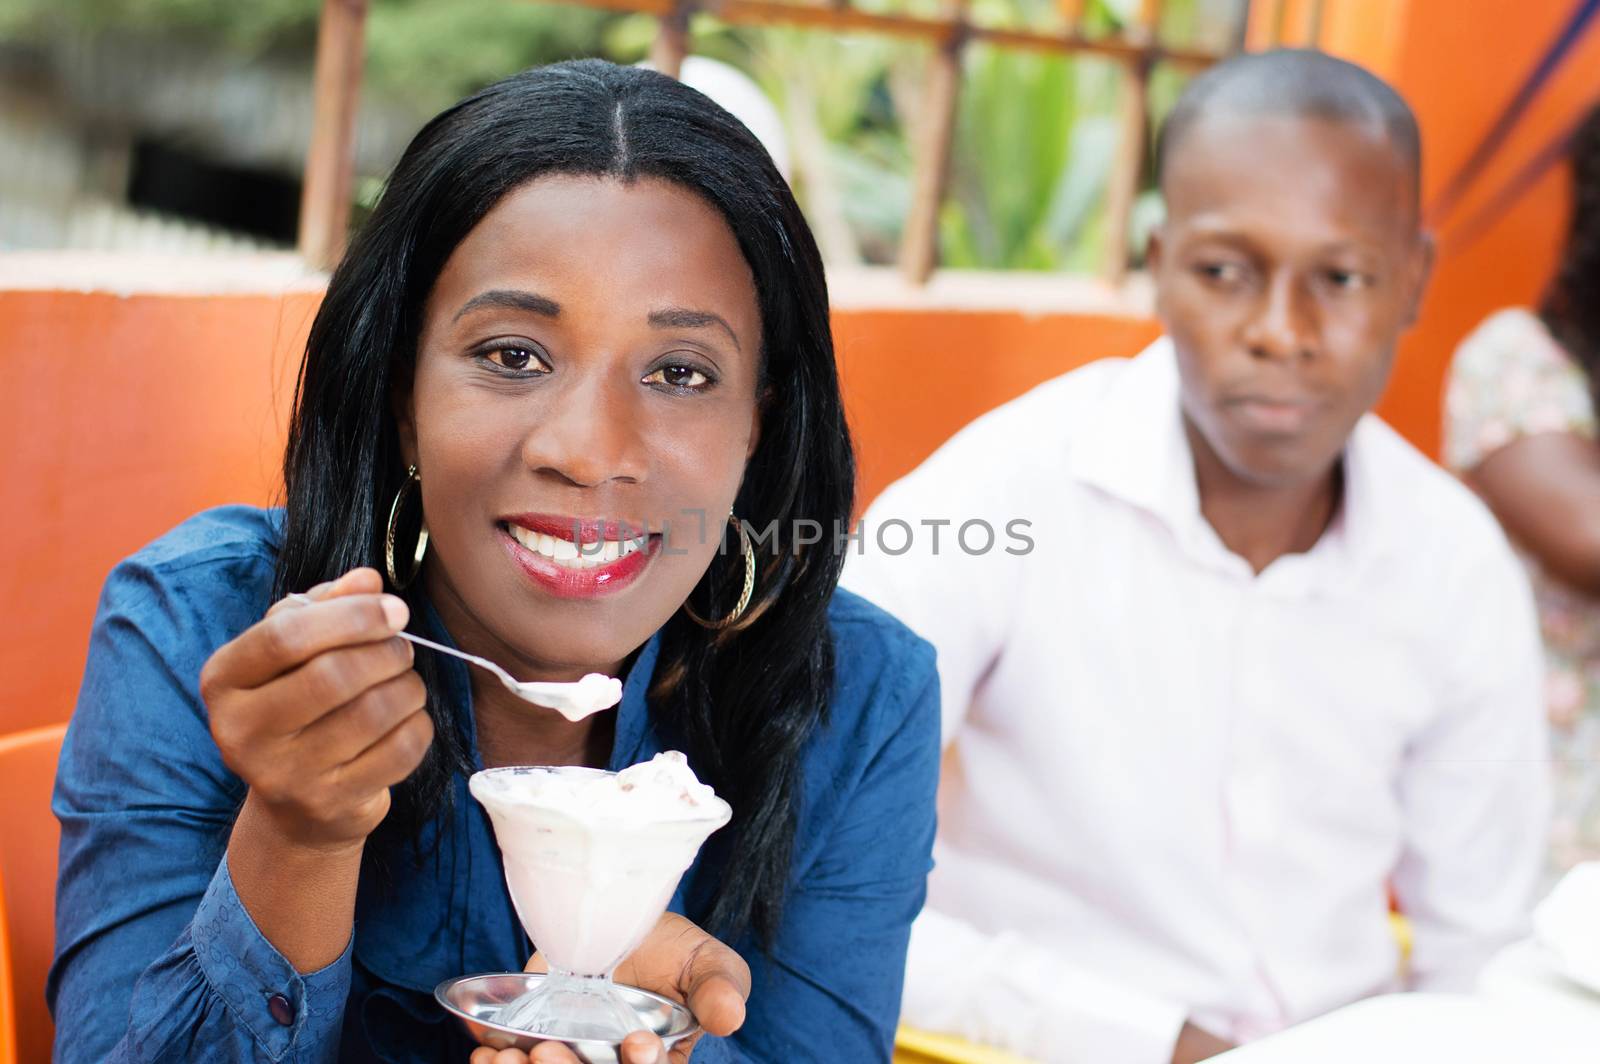 This young woman with an ice cream in hand, seems to be very happy . And a young man looks from behind.